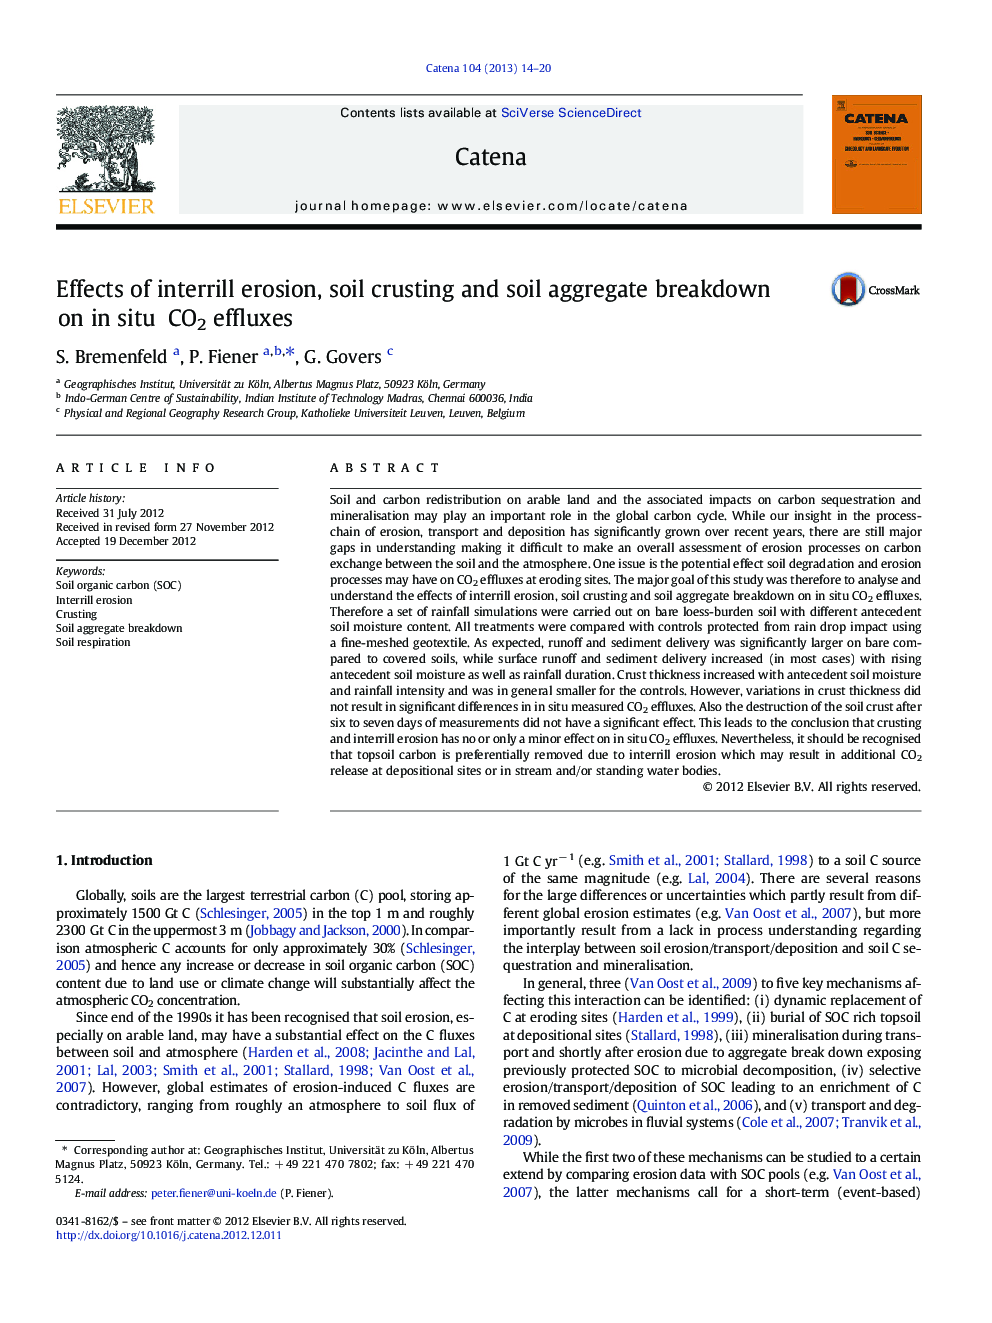 Effects of interrill erosion, soil crusting and soil aggregate breakdown on in situ CO2 effluxes